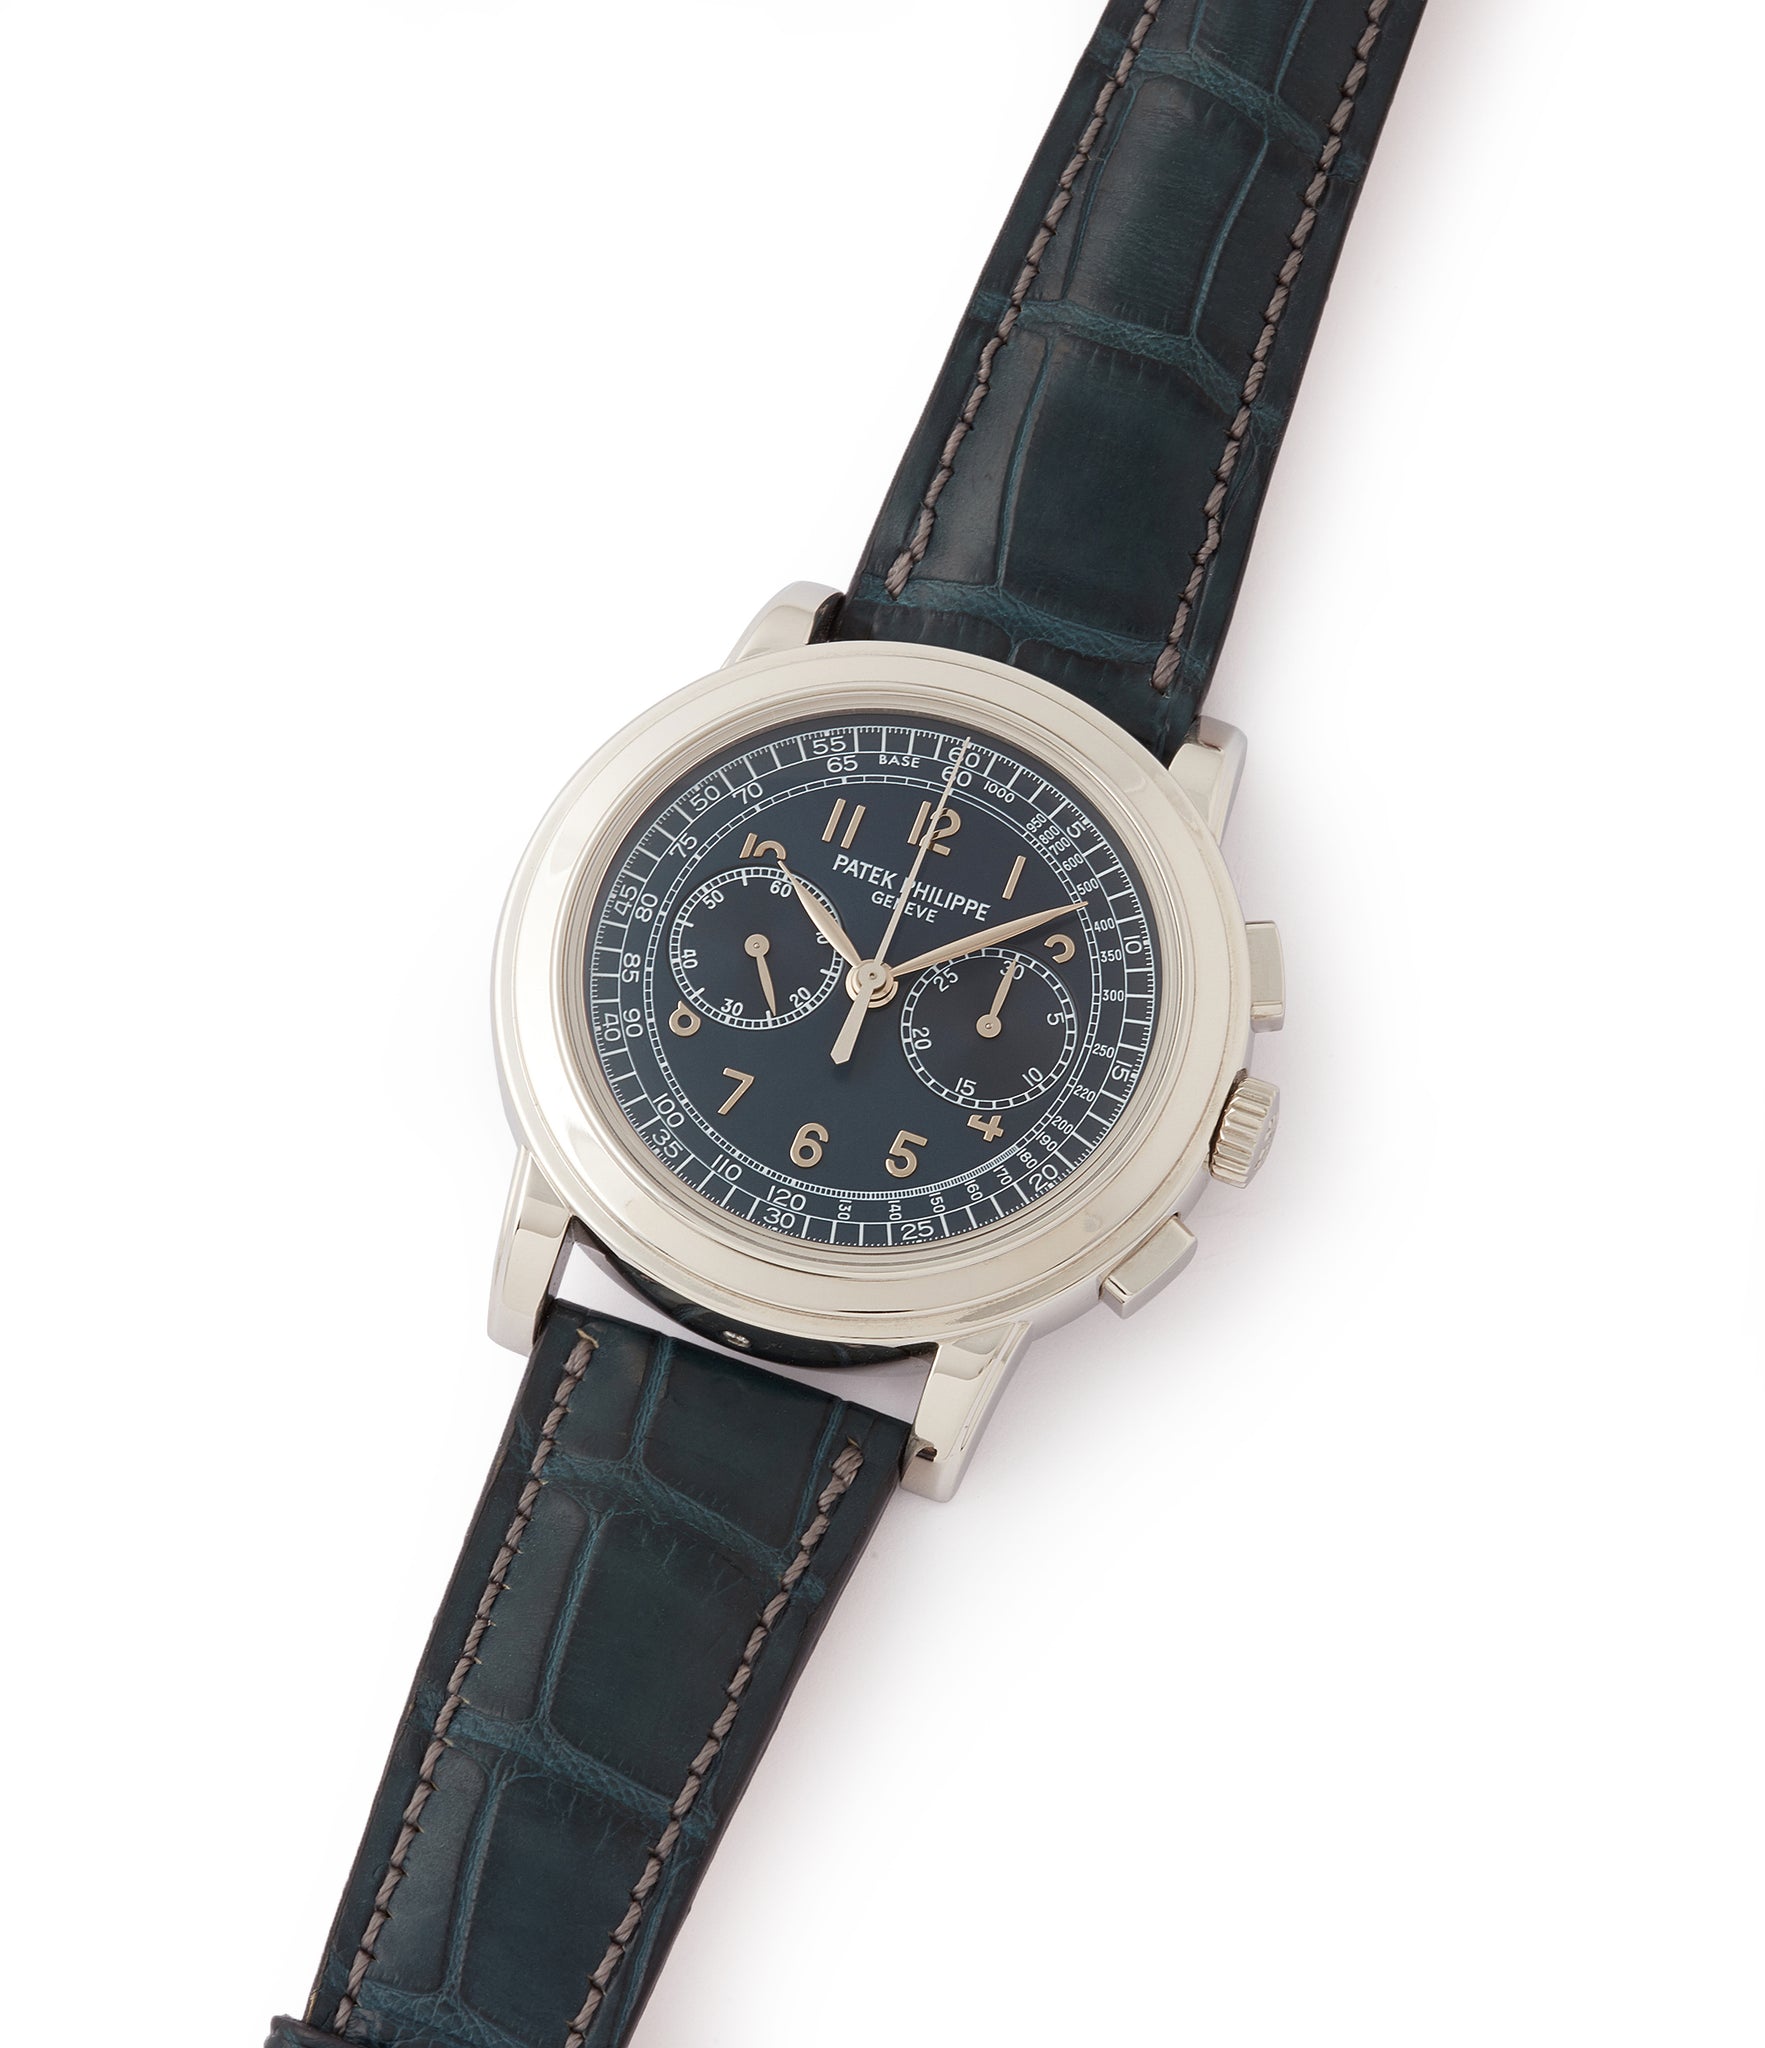 sell rare Patek Philippe 5070P Chronograph rare platinum 42mm luxury watch for sale online at A Collected Man London UK specialist of rare watches